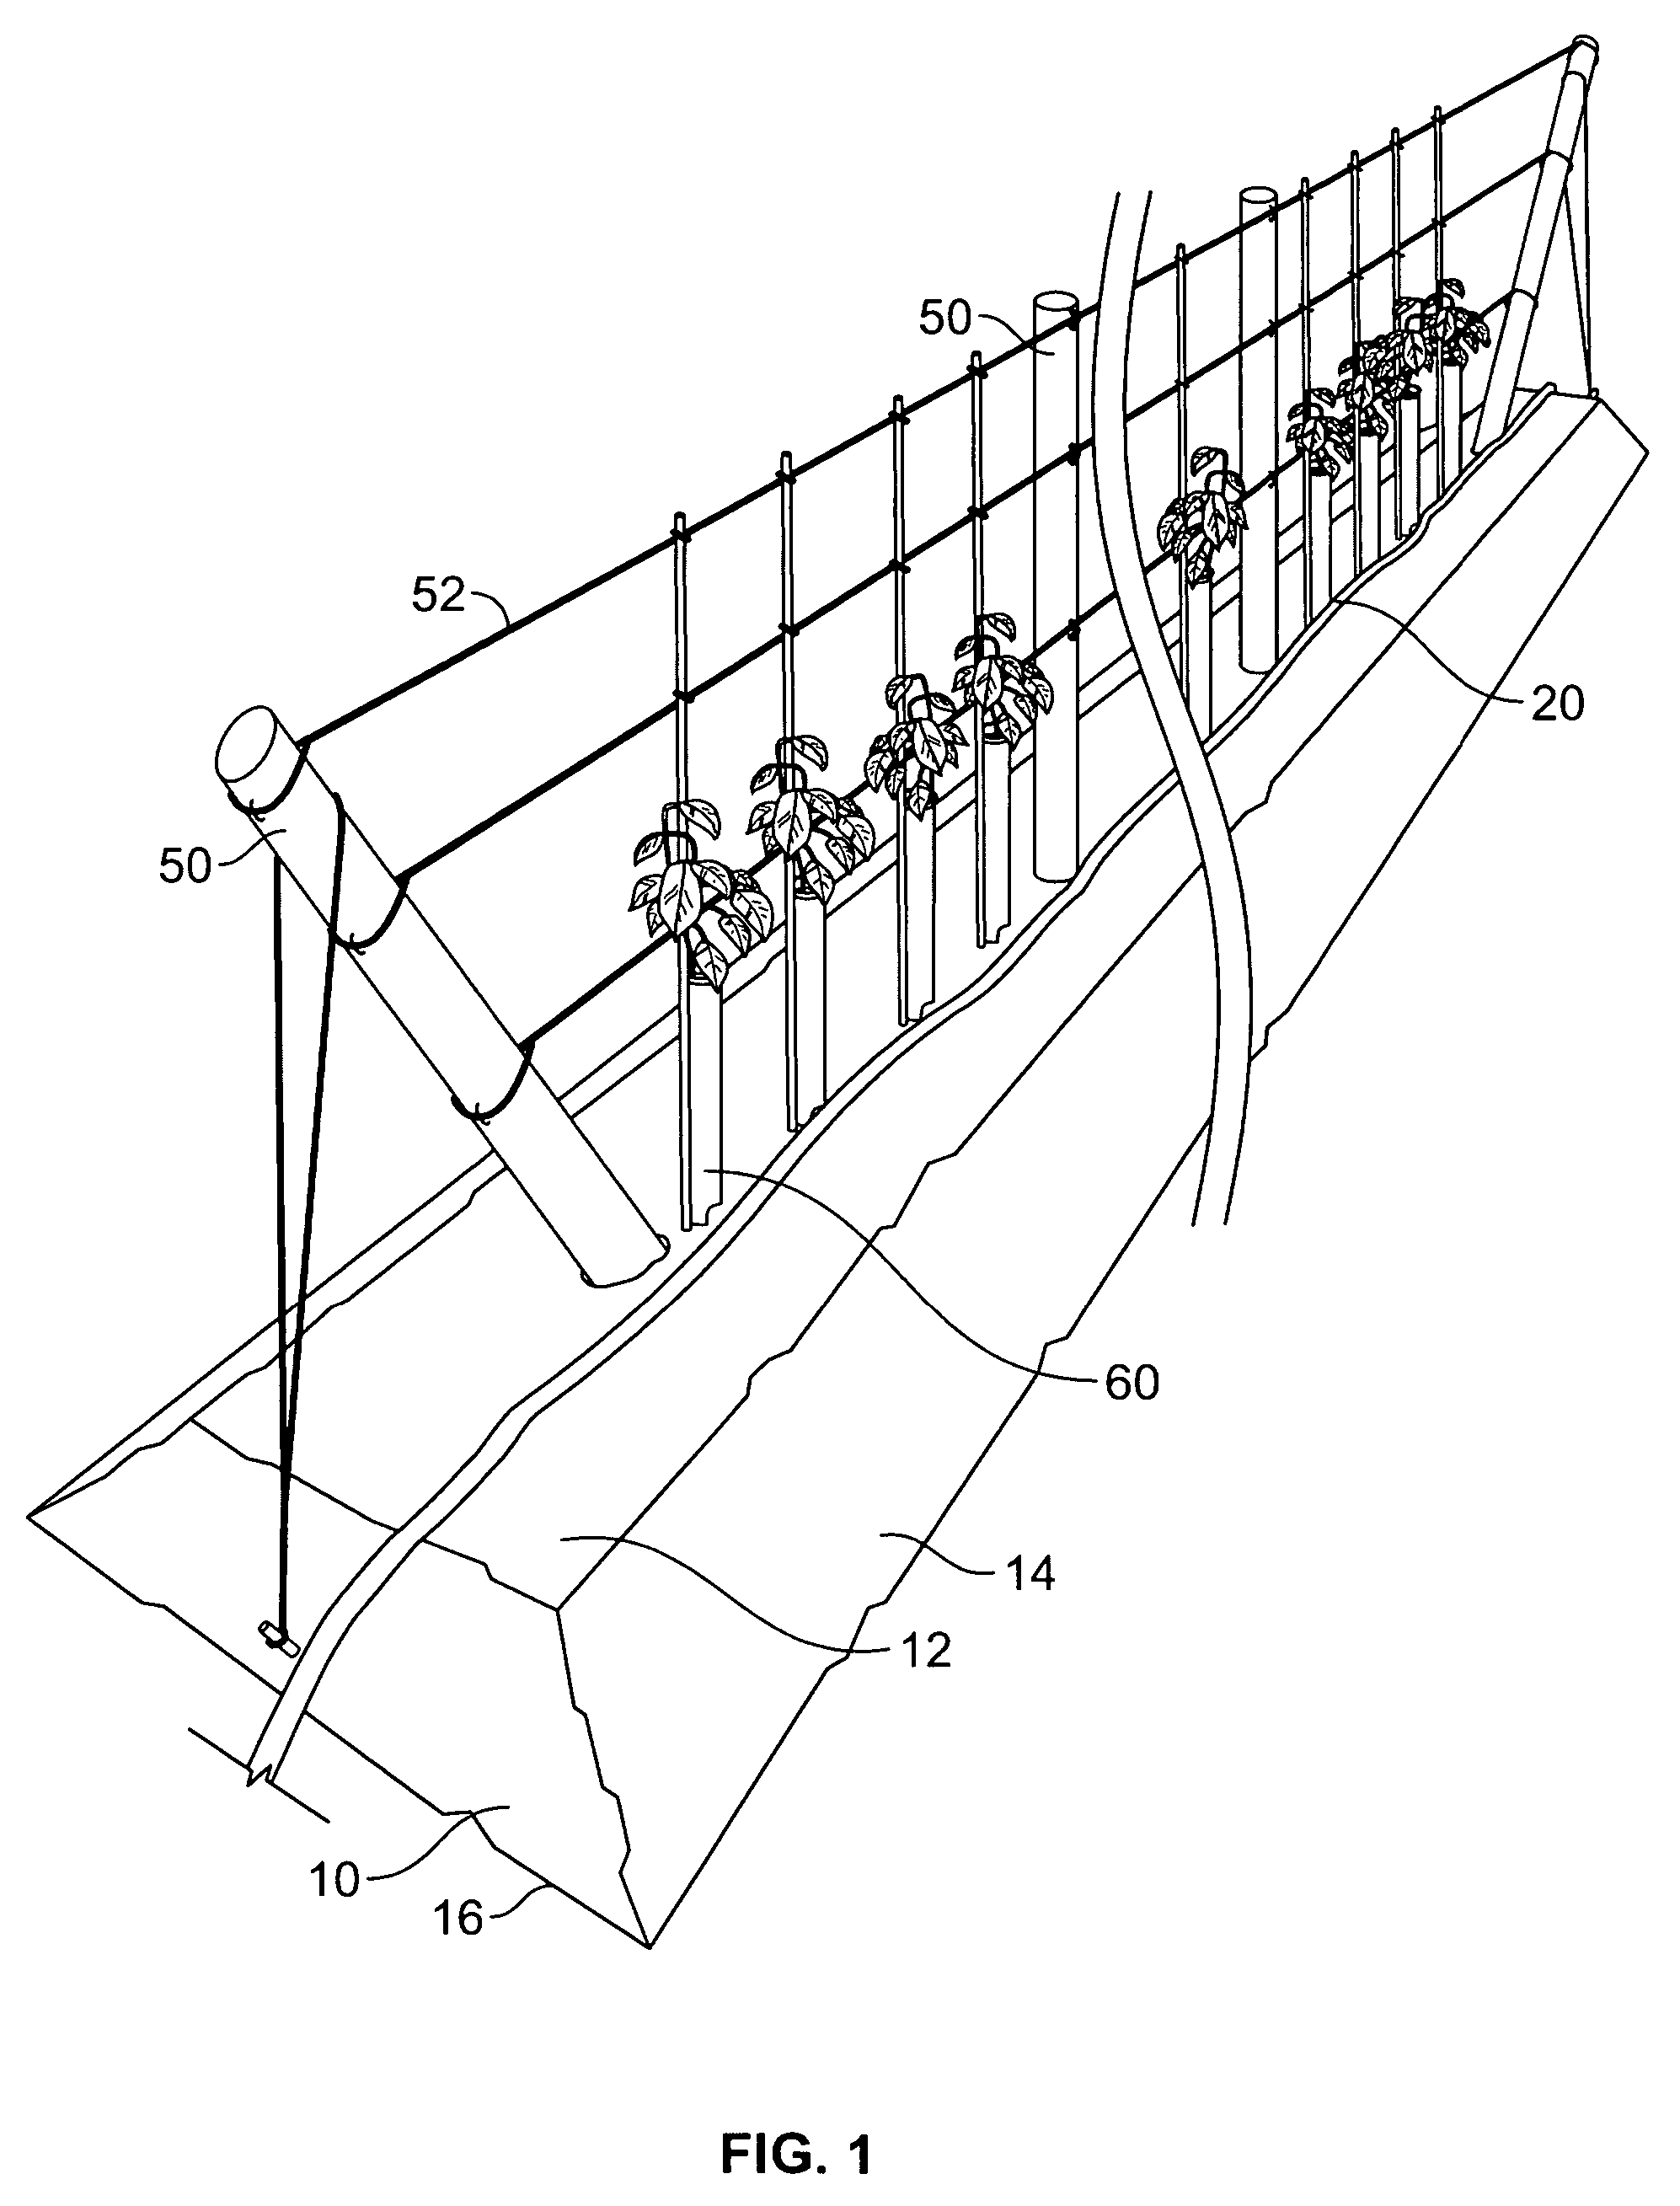 Method of cultivation and components for use therewith